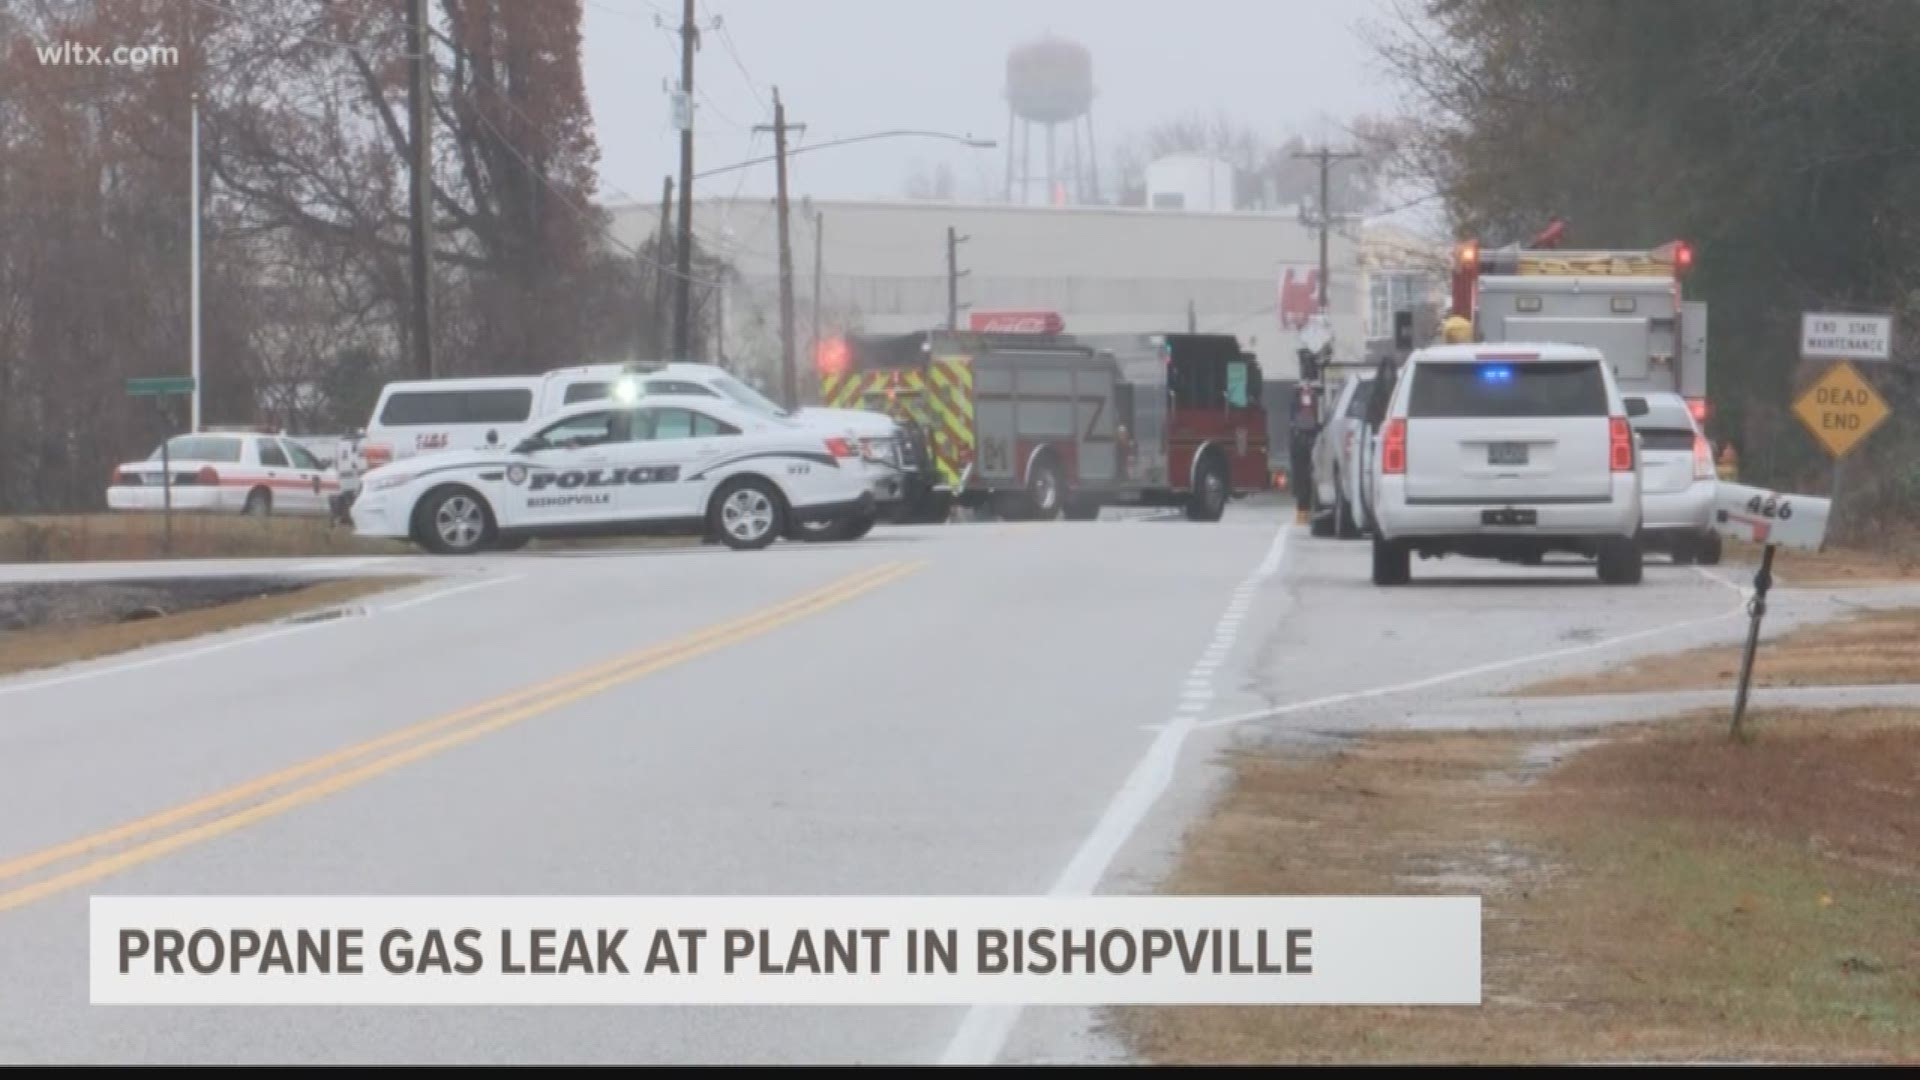 Emergency crews are responding to a propane tanker leak outside the Coca Cola plant in Bishopville.